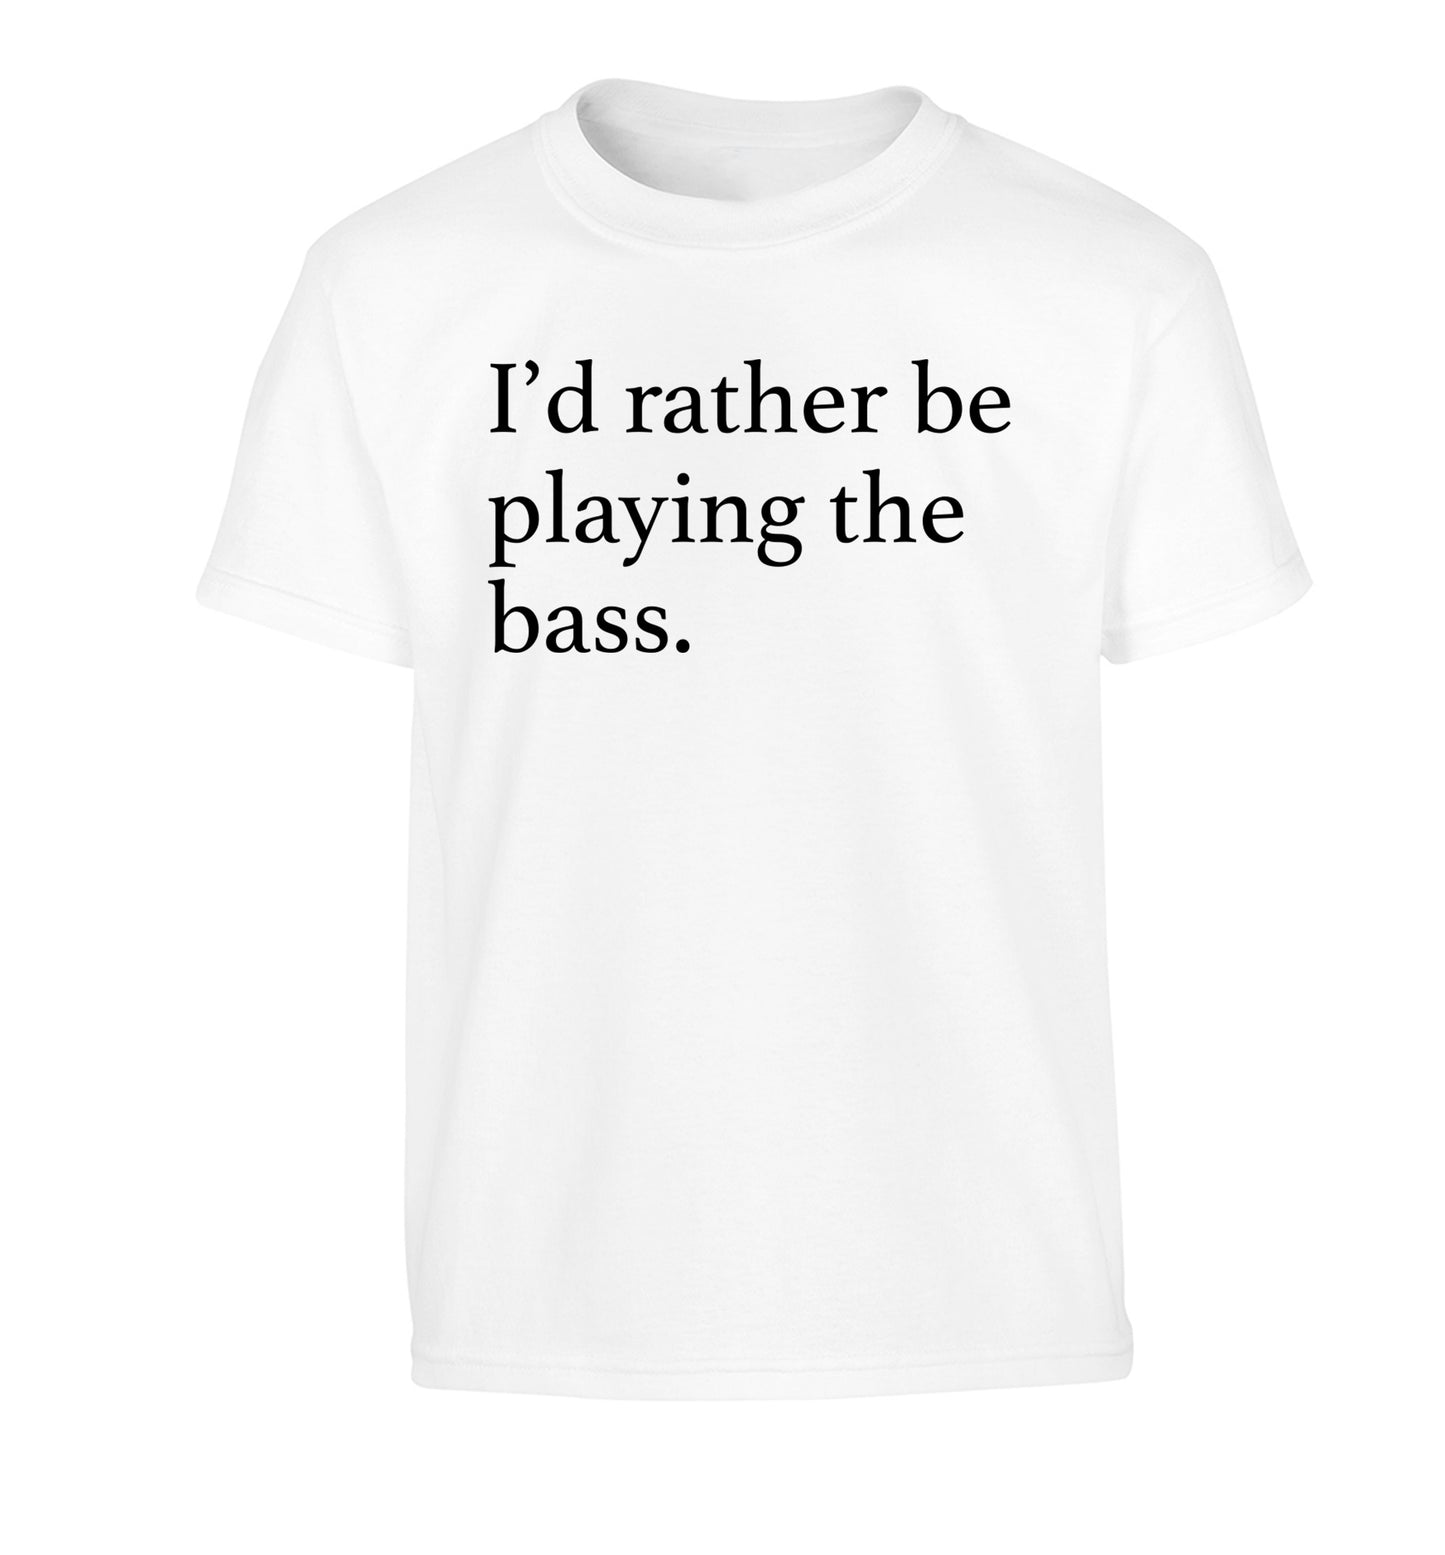 I'd rather by playing the bass Children's white Tshirt 12-14 Years